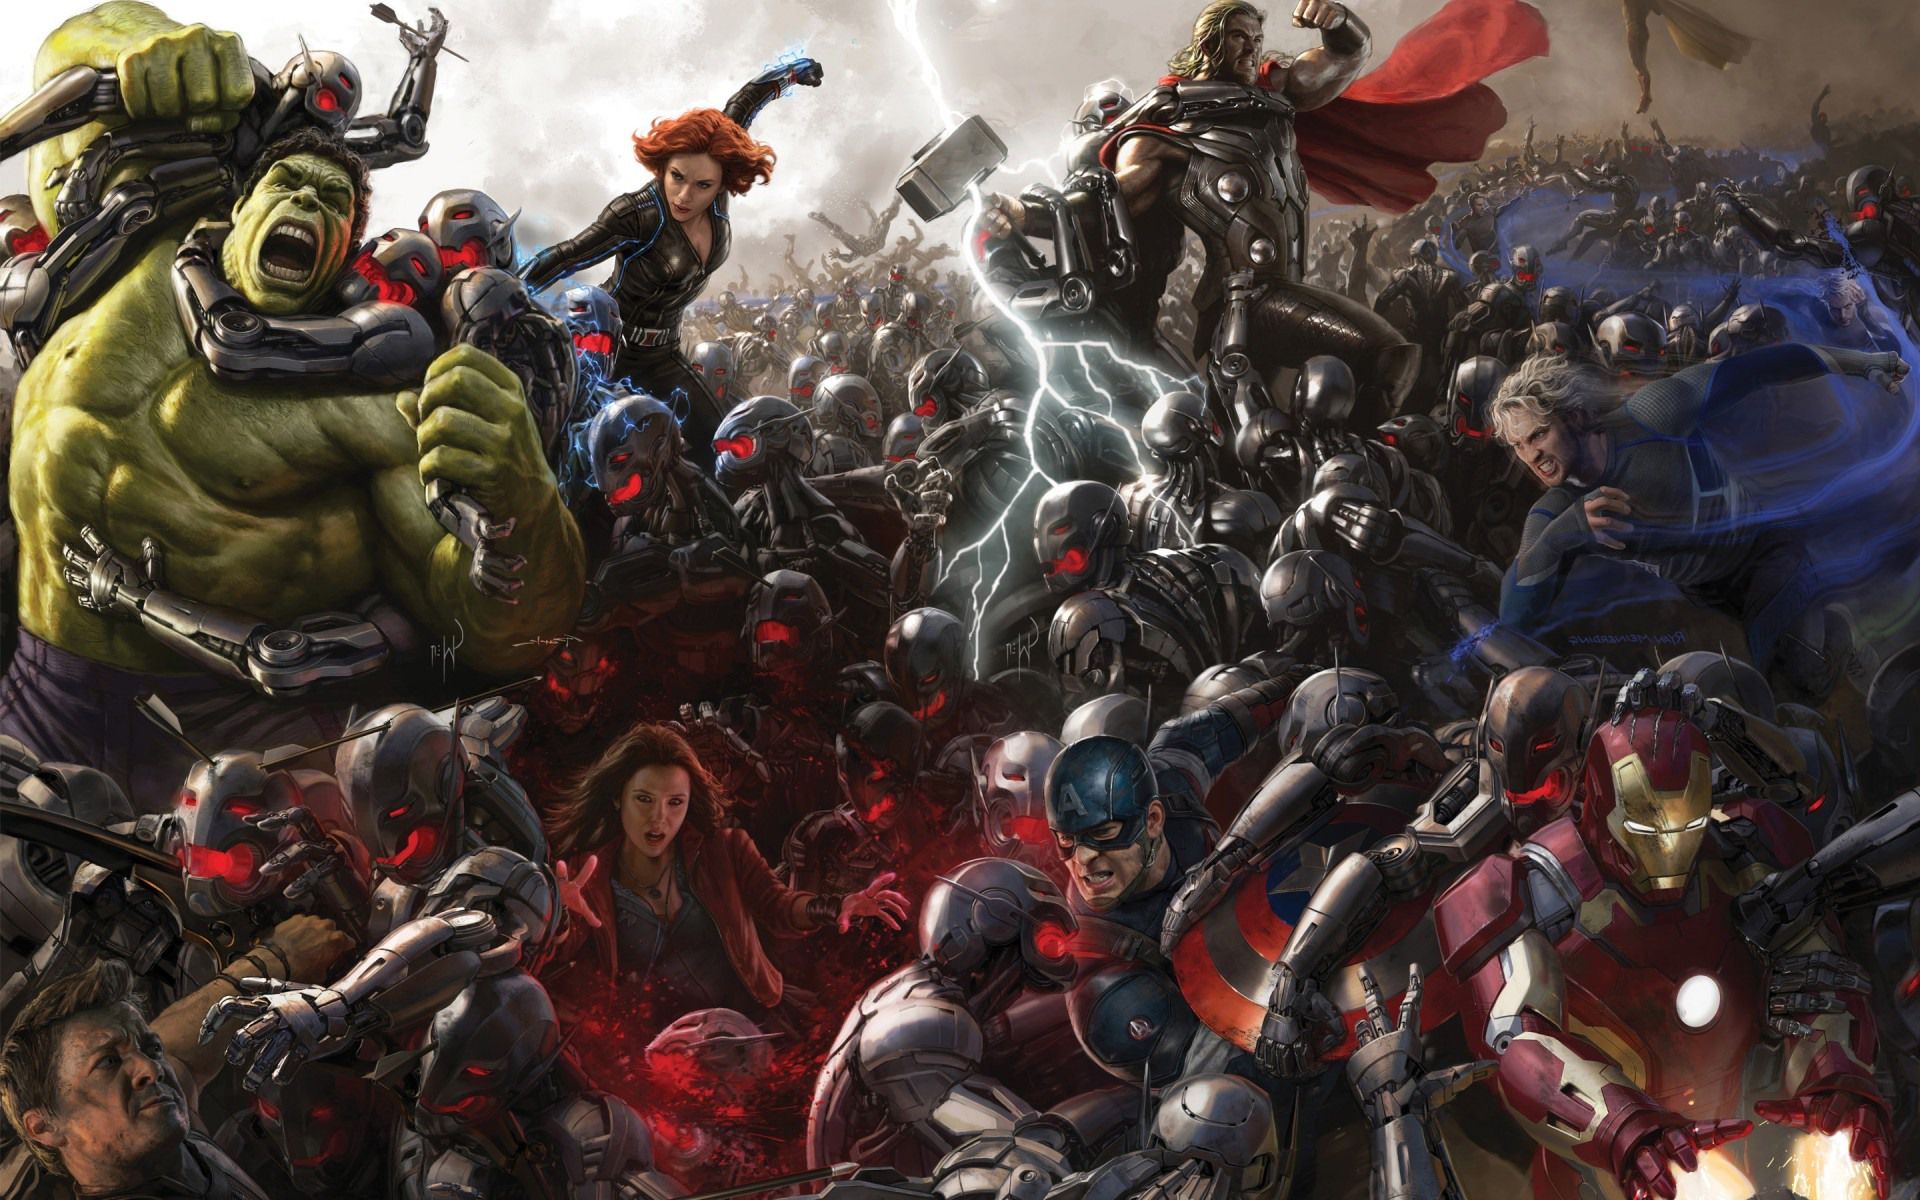 Box Office Futures: Avengers: Age of Ultron Predictions